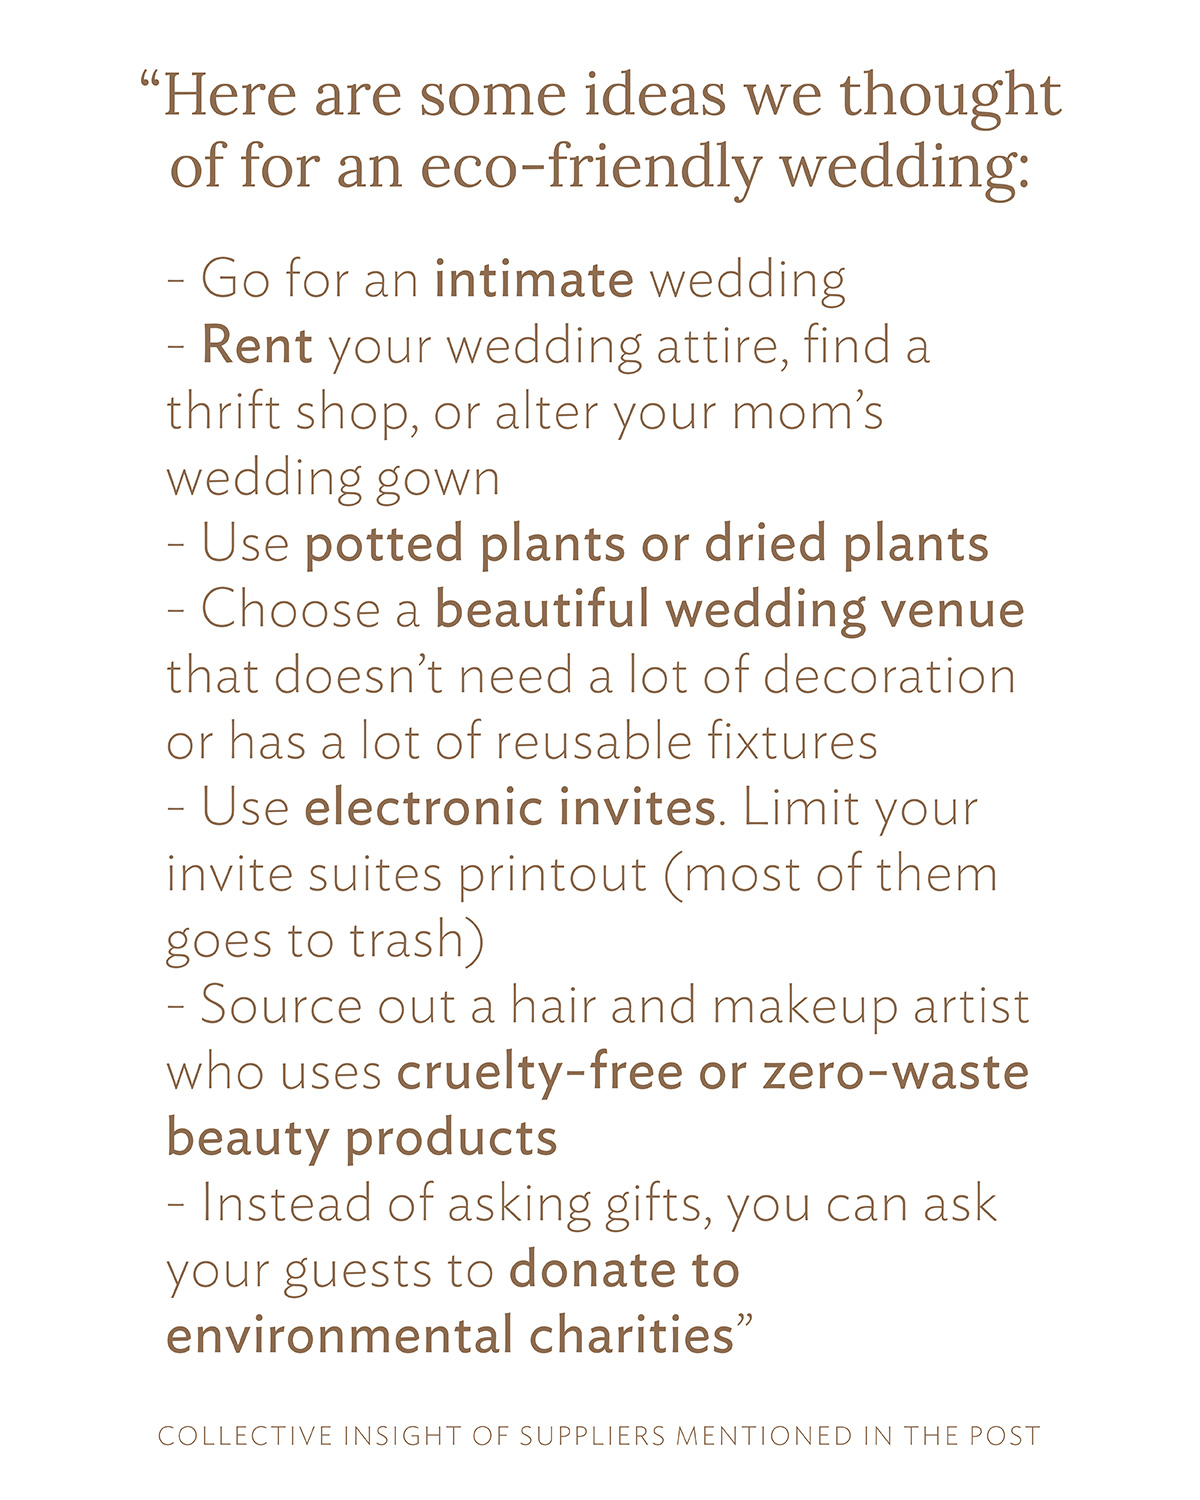 Here are some ideas we thought of for an eco-friendly wedding: Go for an intimate wedding Rent your wedding attire, find a thrift shop, or alter your mom's wedding gown Use potted plants or dried plants Choose a beautiful wedding venue that doesn't need a lot of decoration or has a lot of reusable fixtures Use electronic invites. Limit your invite suites printout (most of them goes to trash) Source out a hair and makeup artist who uses cruelty-free or zero-waste beauty products Instead of asking gifts, you can ask your guests to donate to environmental charities